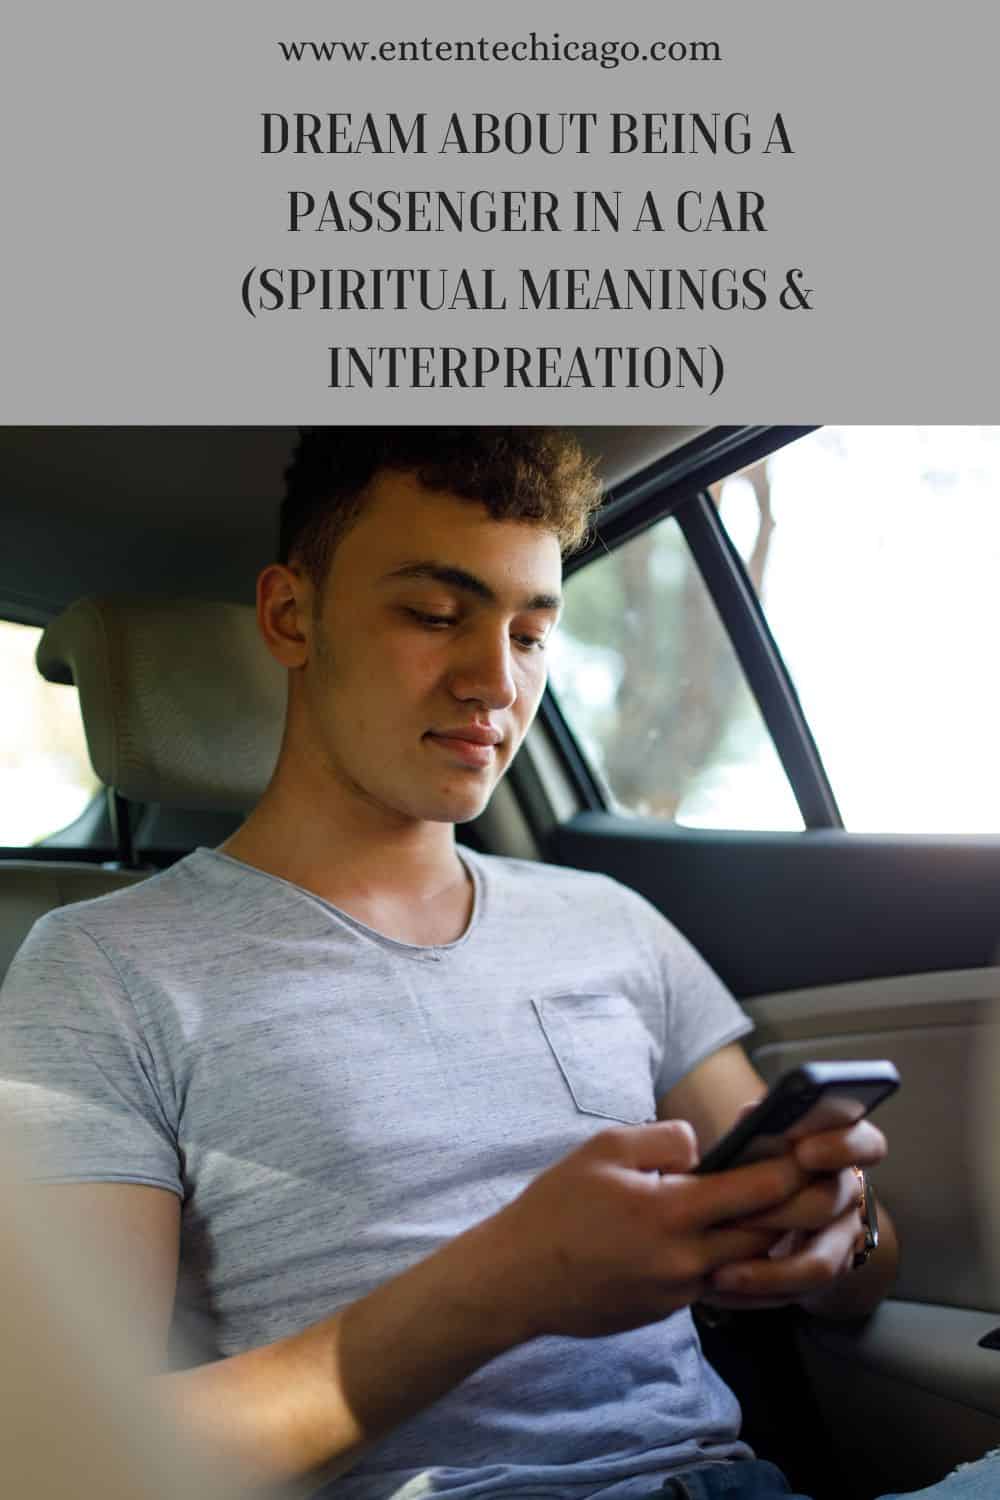 Dream About Being A Passenger In A Car (Spiritual Meanings & Interpreation)